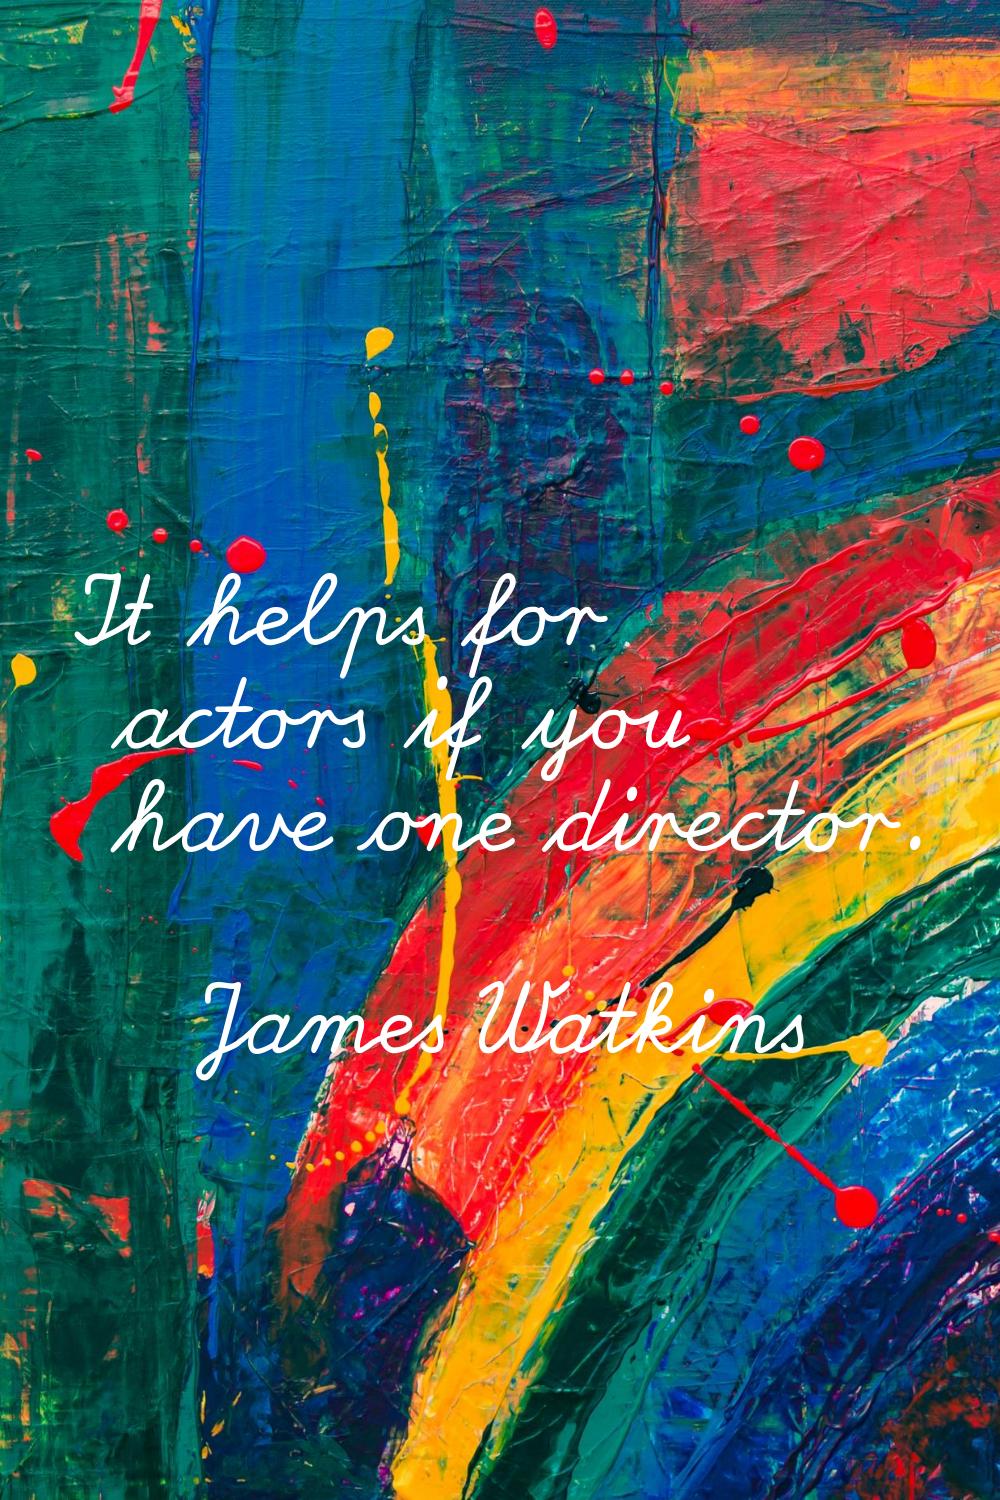 It helps for actors if you have one director.